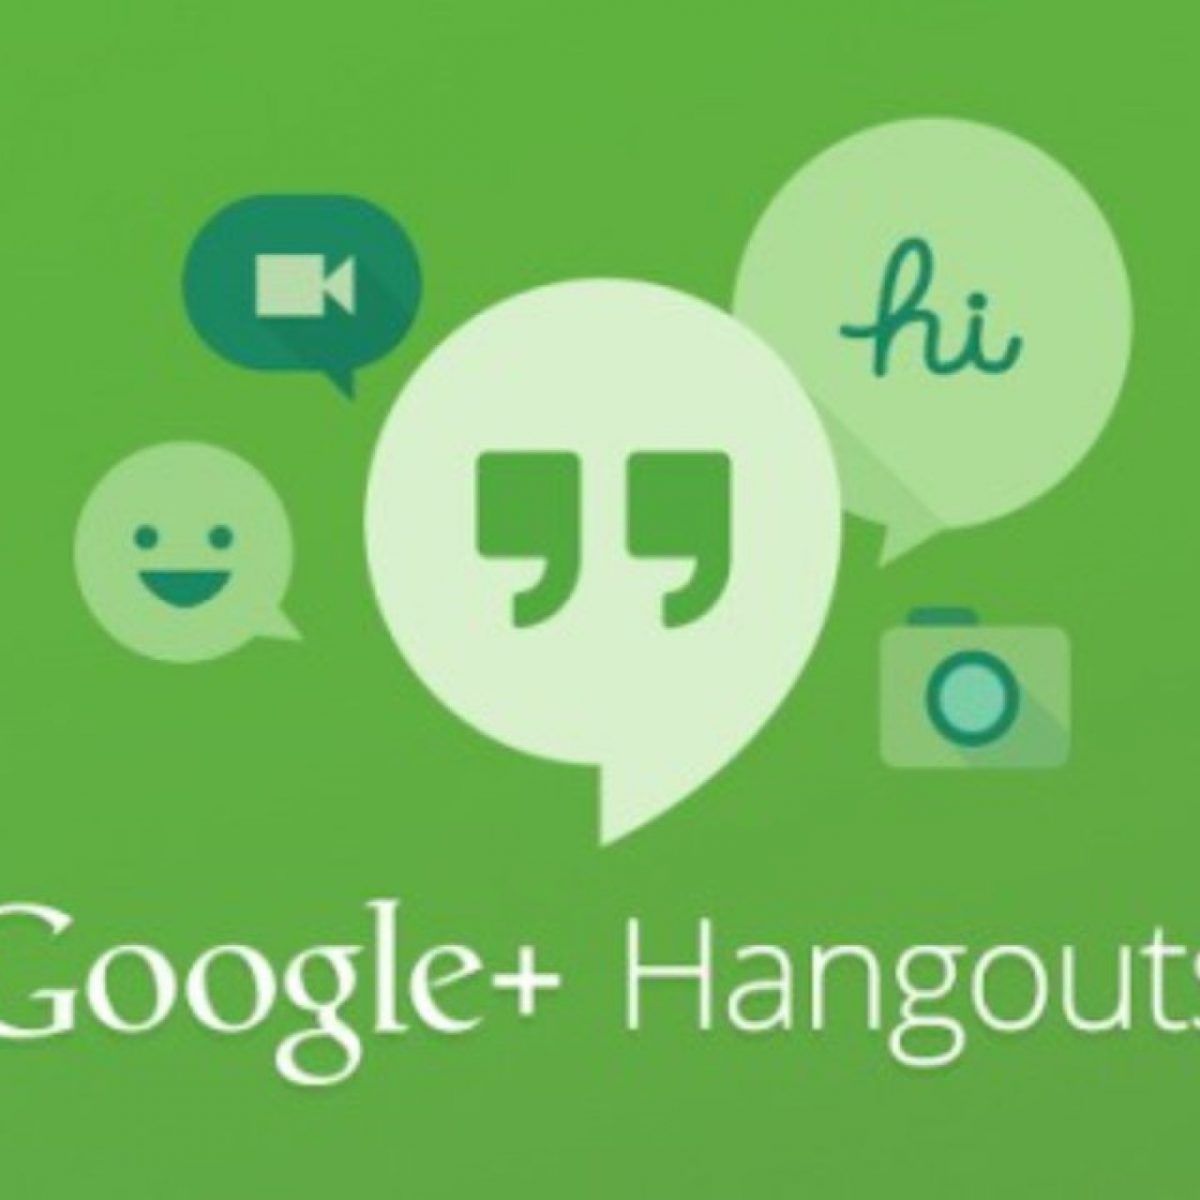 Download The Latest Version Of Google Hangouts On Windows 10